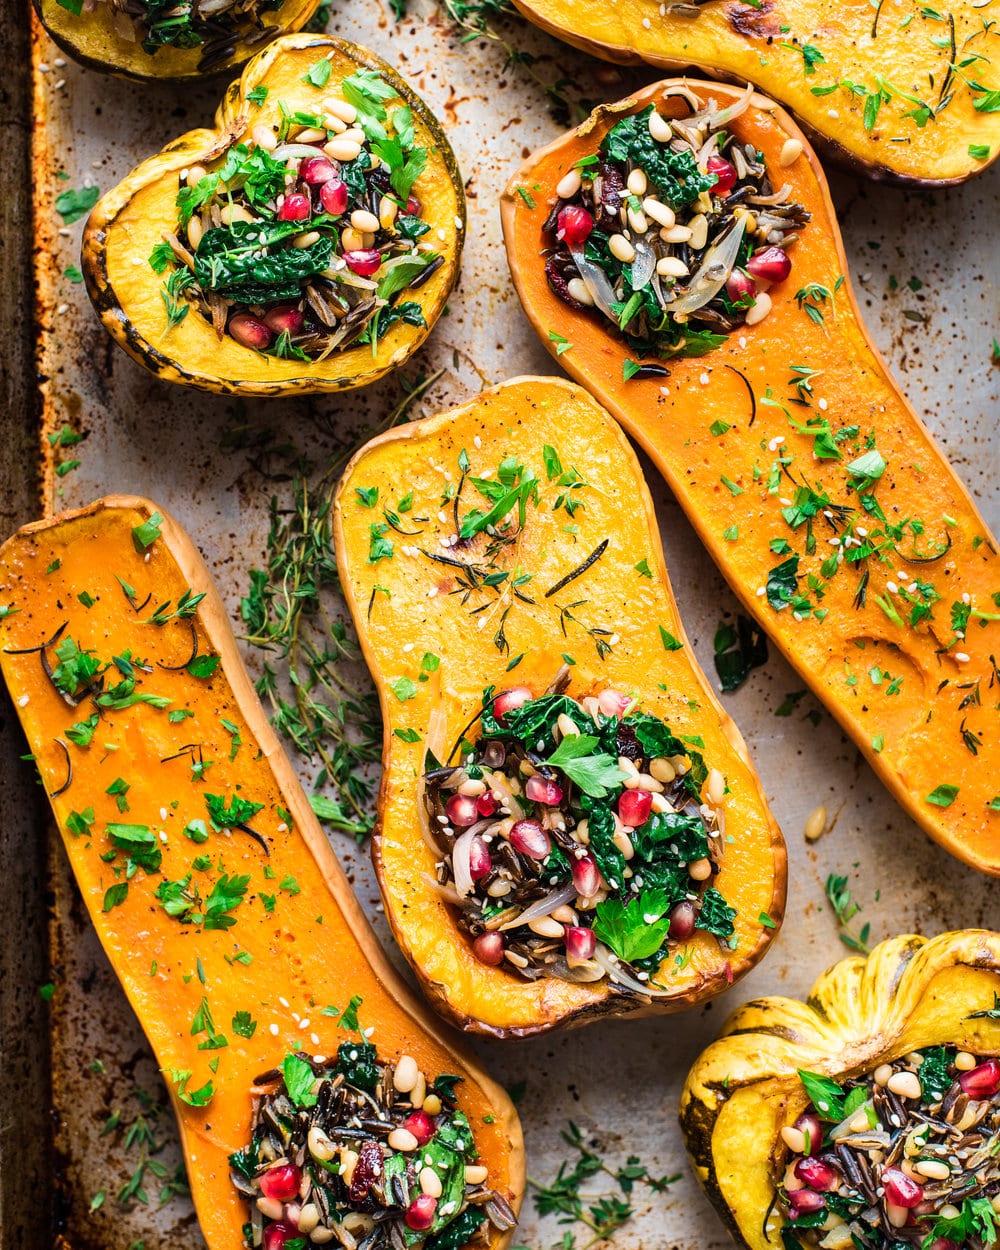 Seven stuffed squash halves topped with fresh herbs on a baking tray.